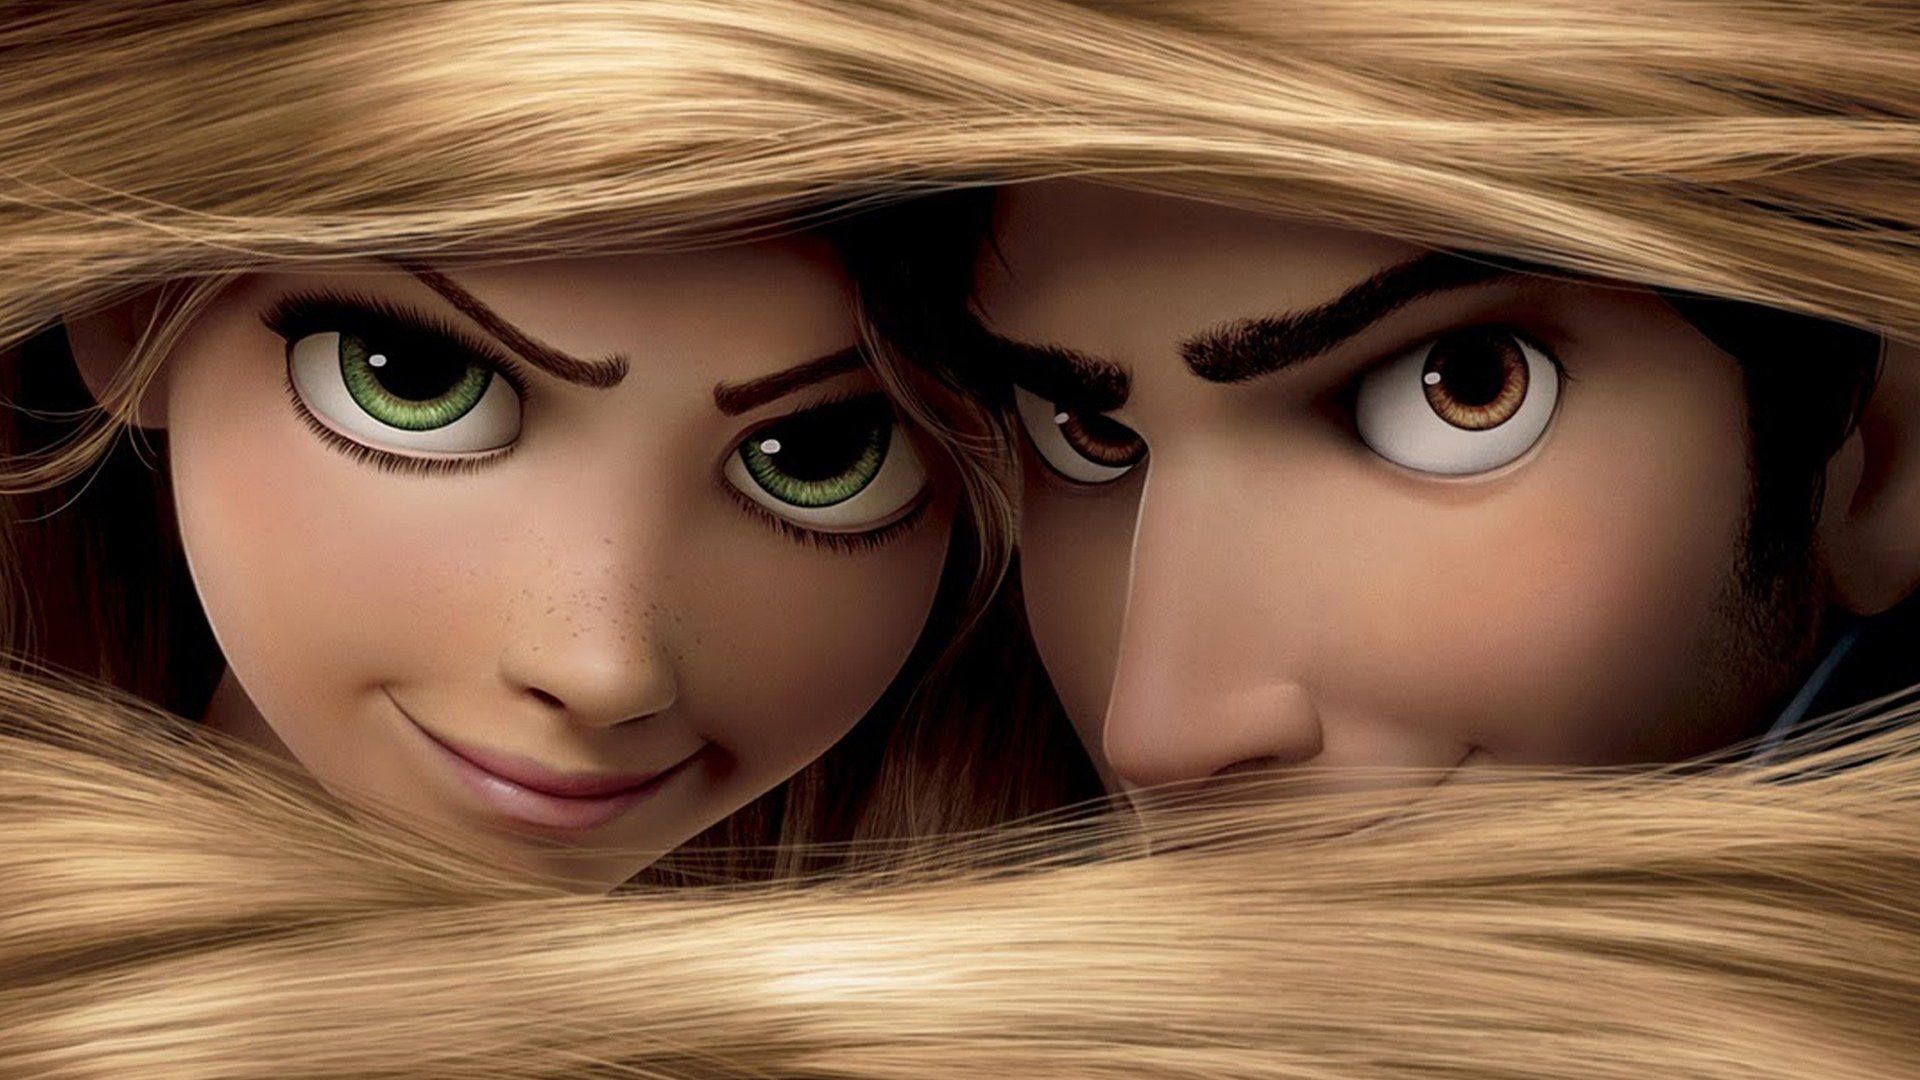 Tangled picture wallpaper